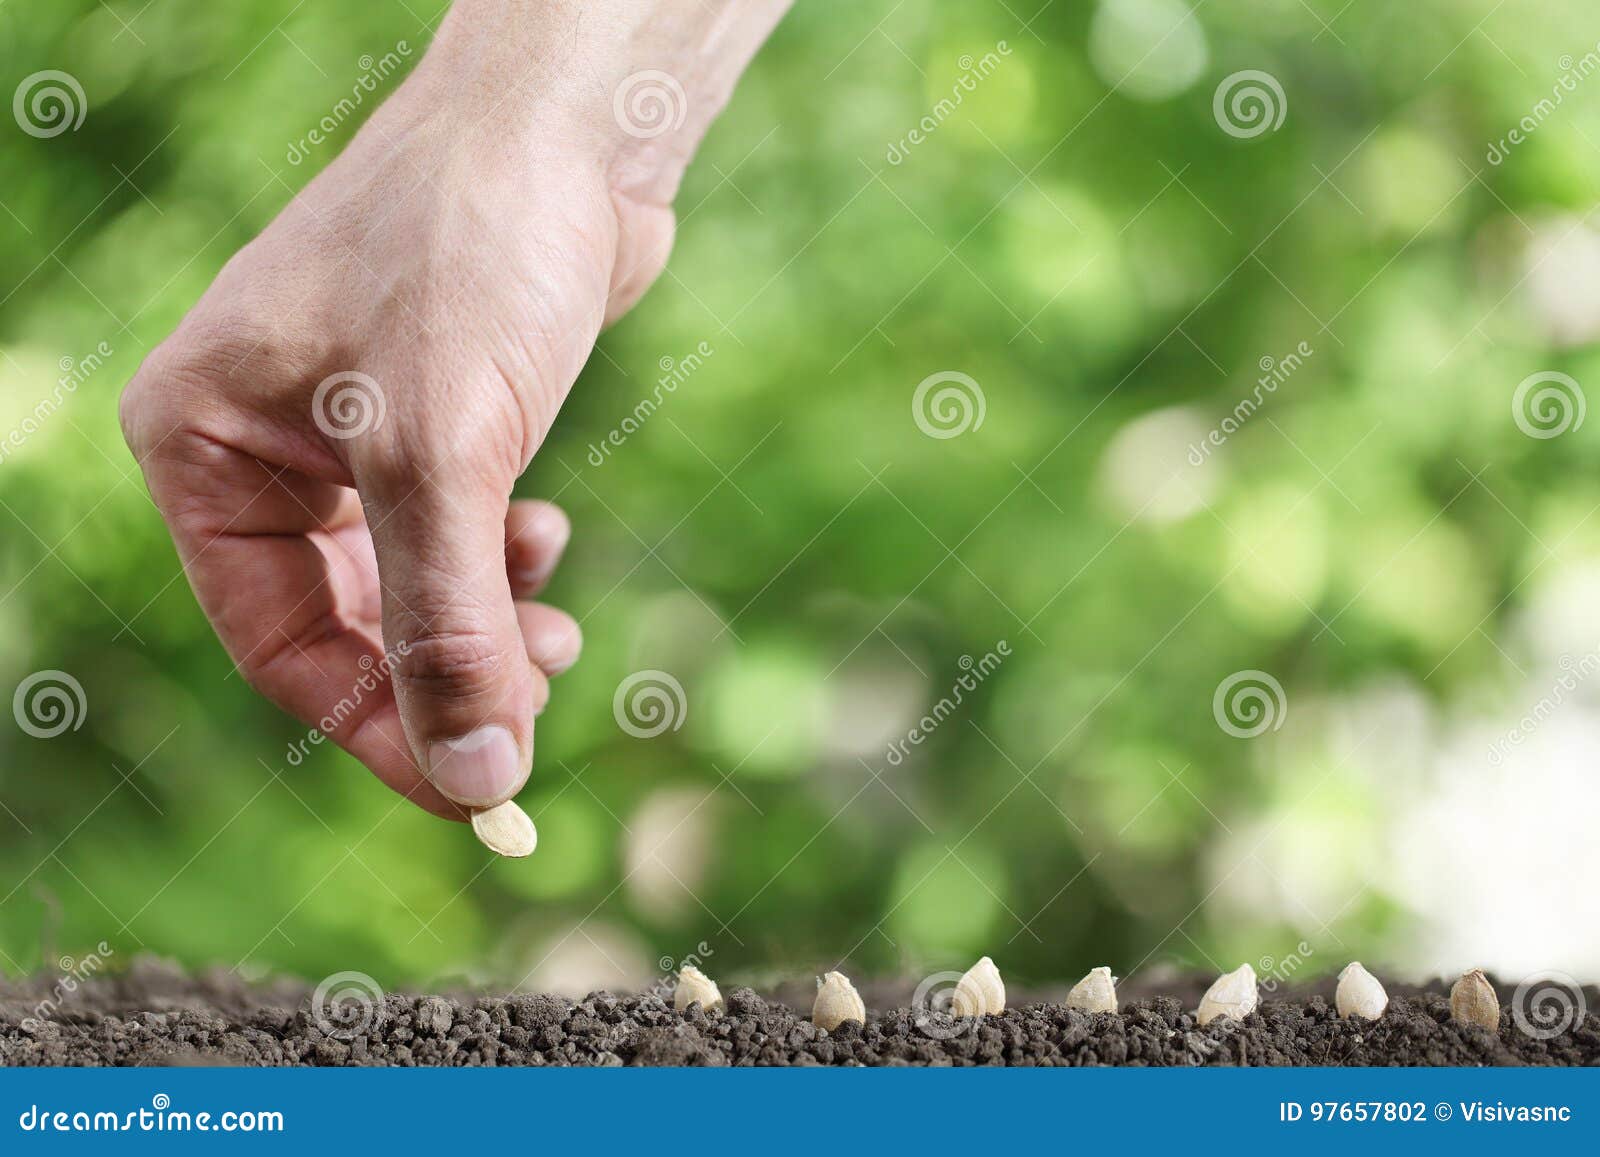 hand sowing seeds in vegetable garden soil, close up on gree